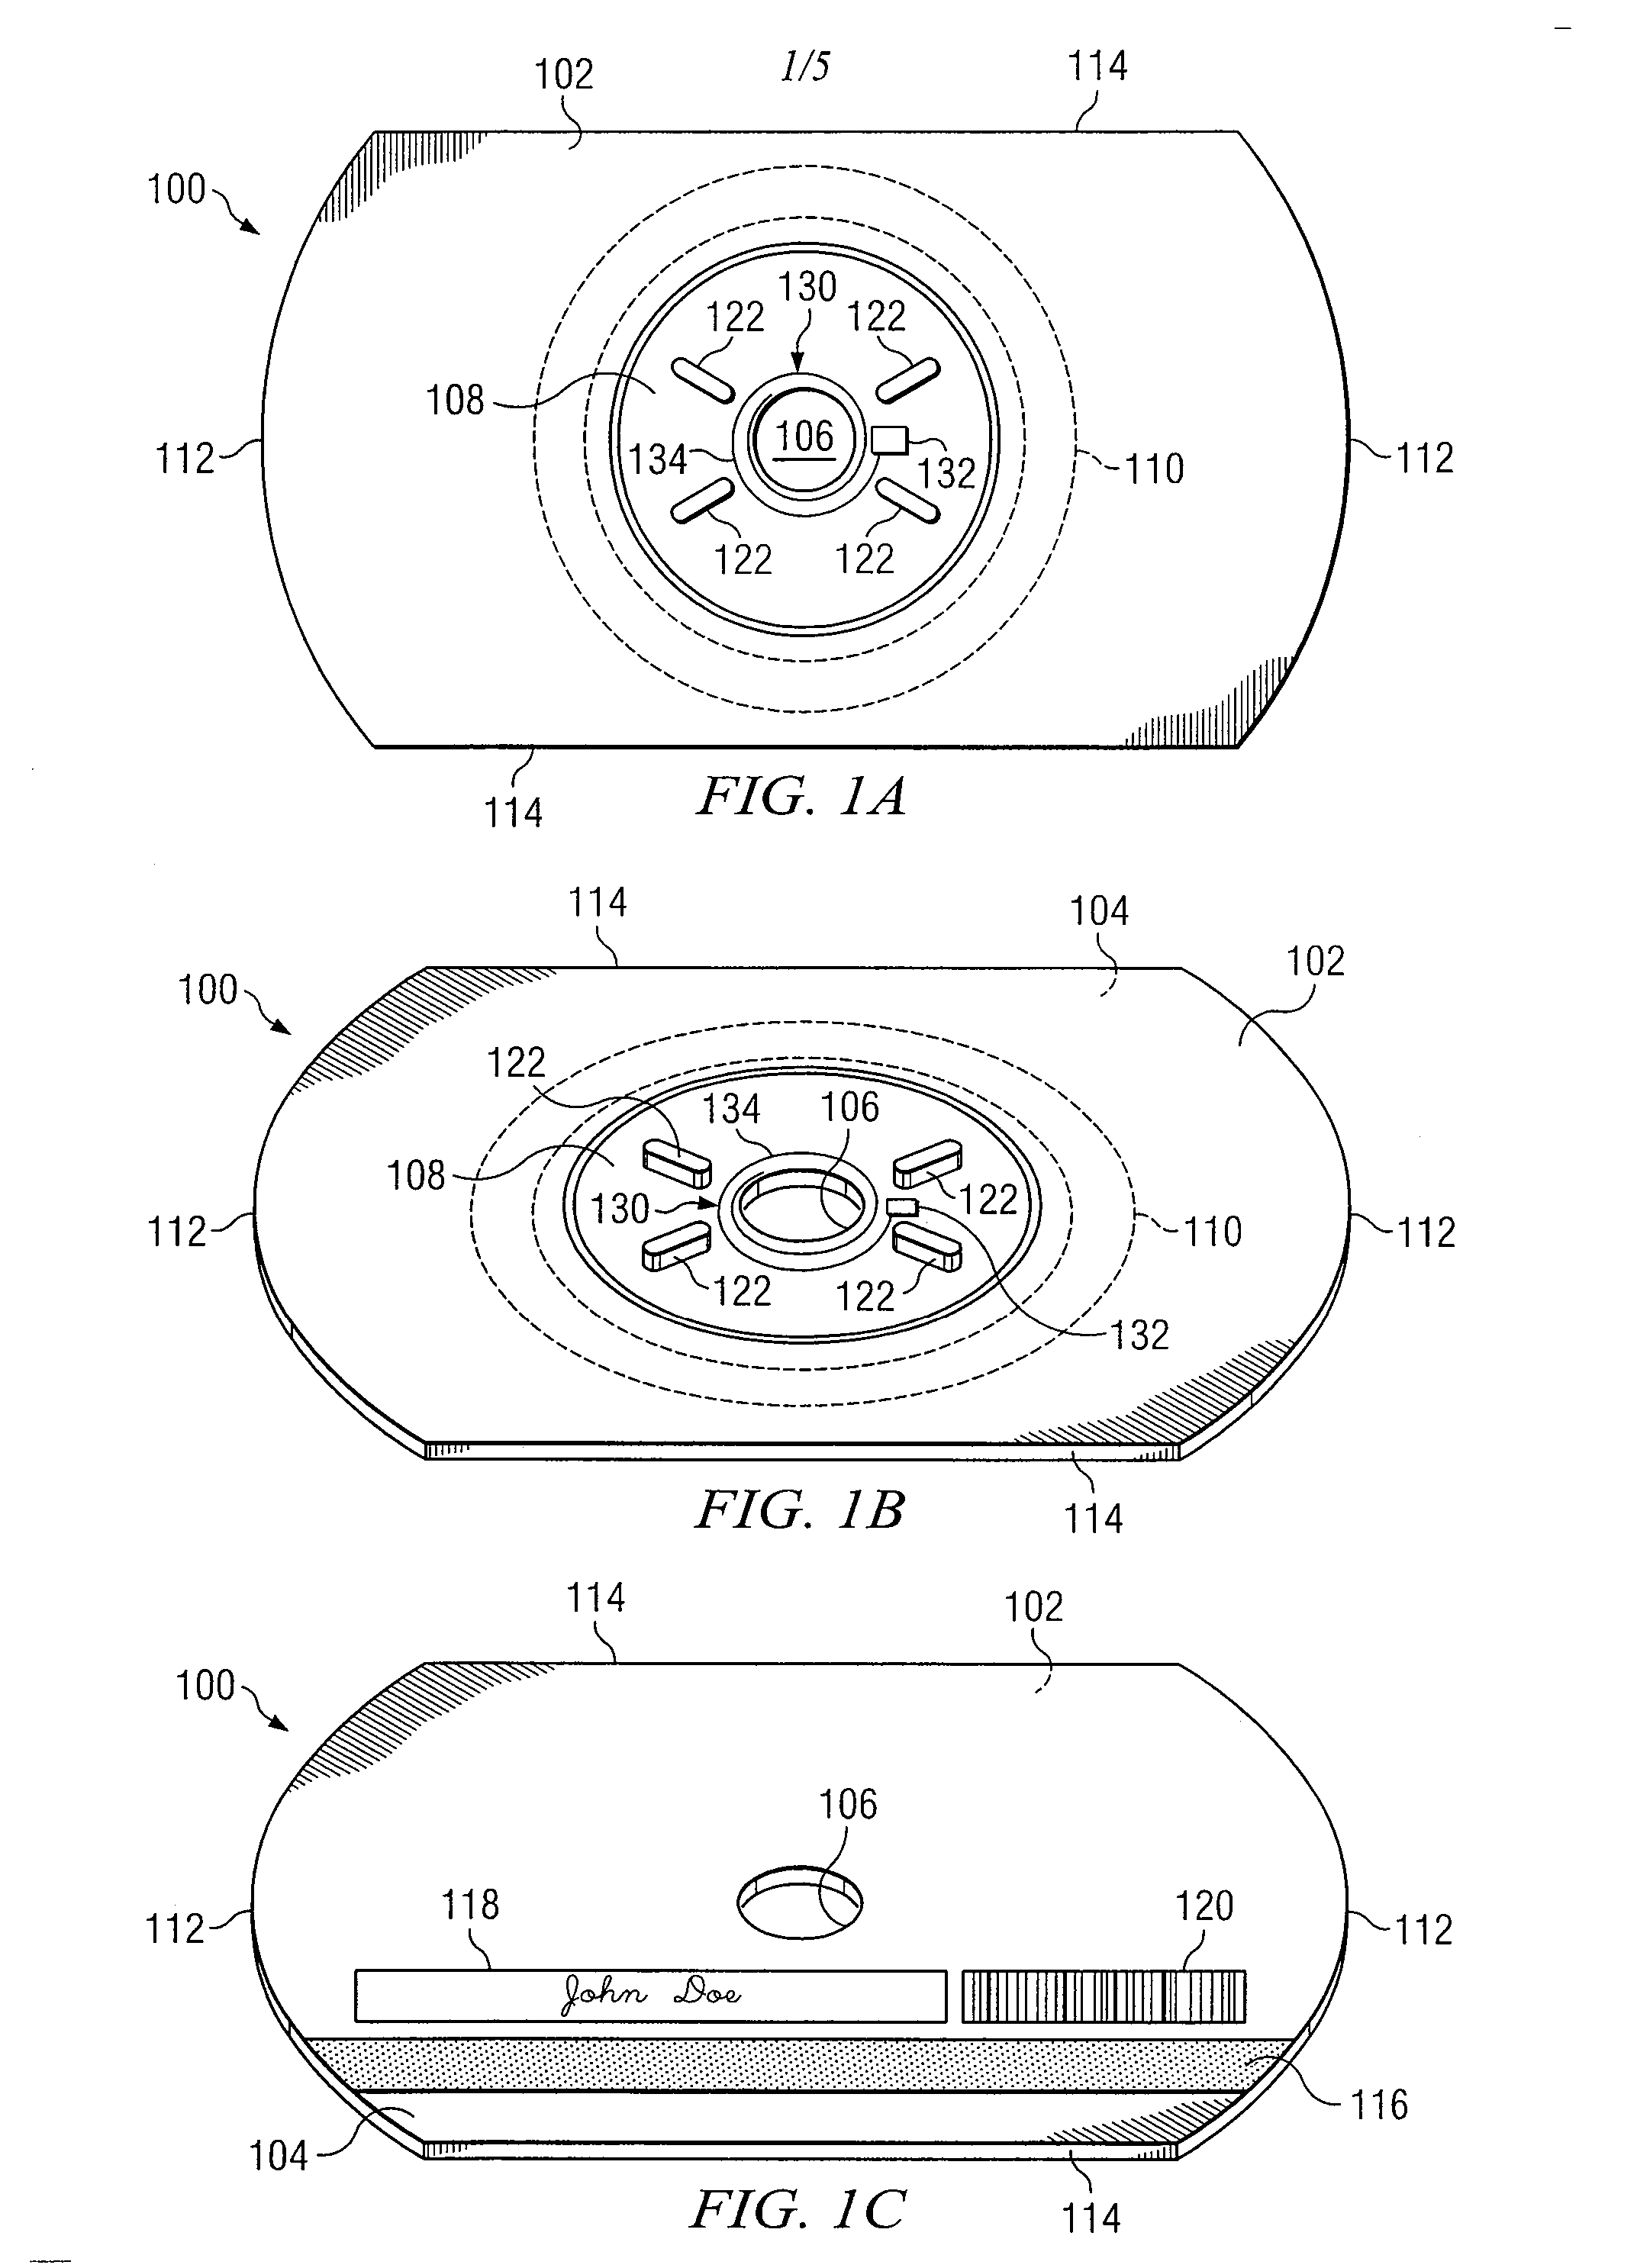 Thin Optical Disc Having Remote Reading Capability